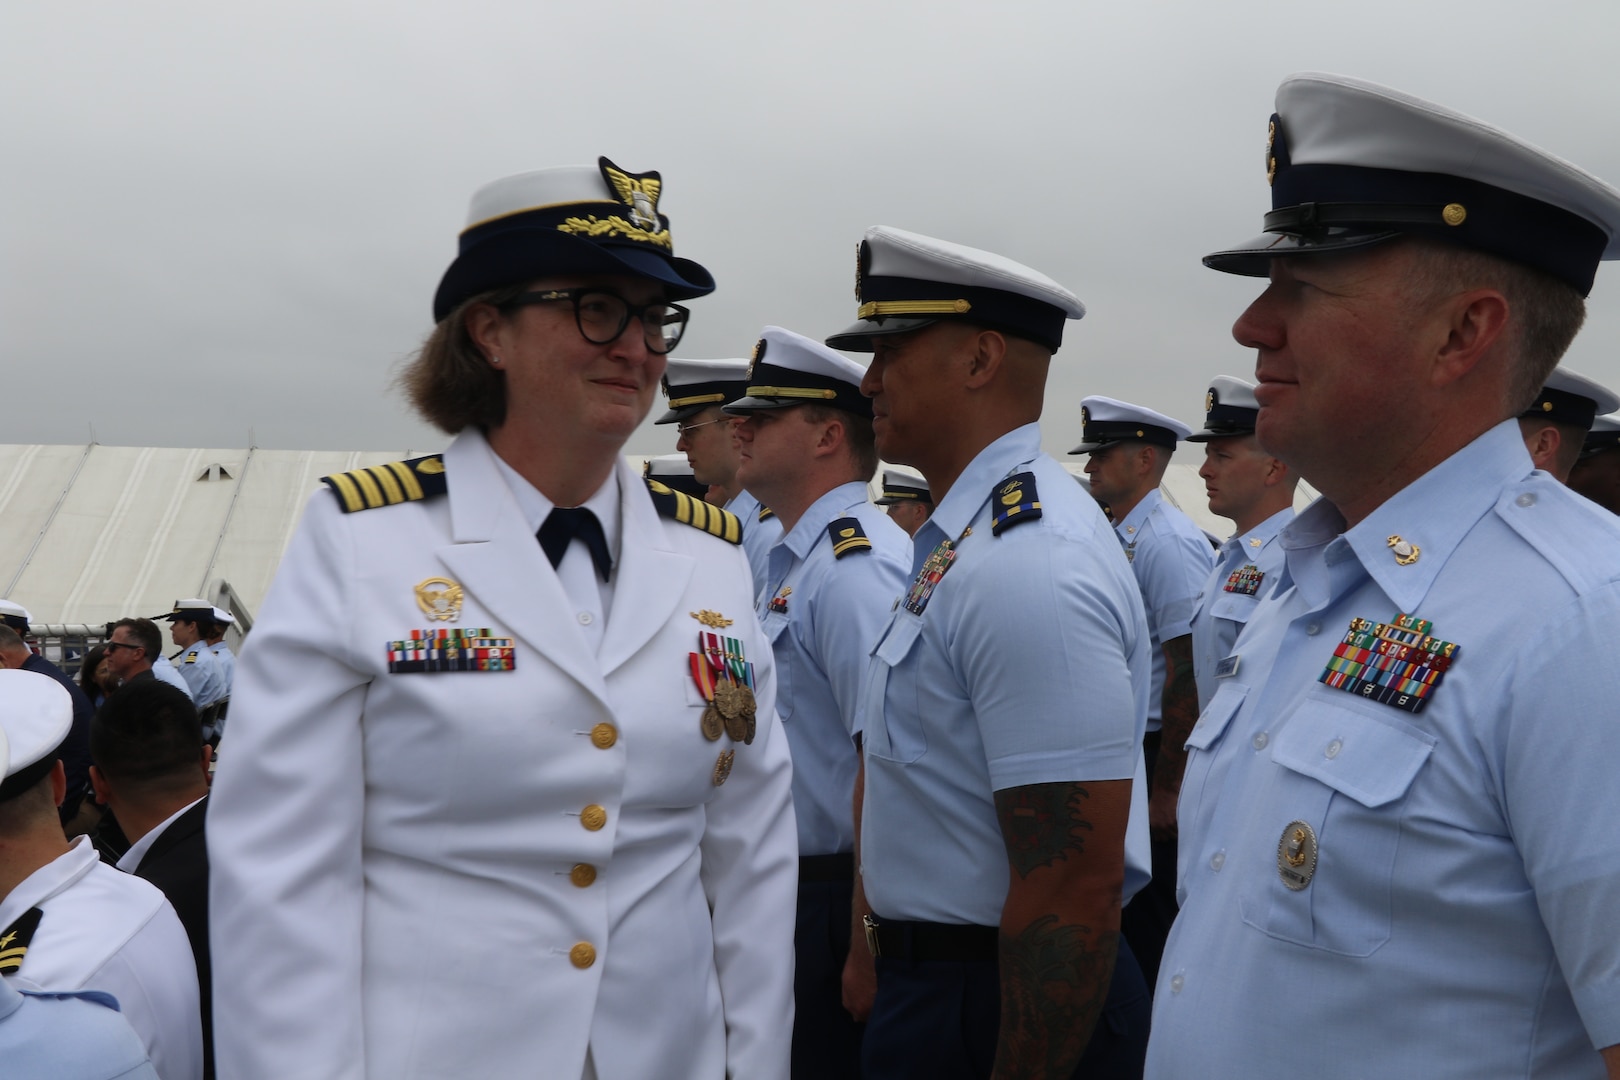 Capt. Rula Deisher (pictured) and Capt. James O’Mara conduct a personnel inspection during the U.S. Coast Guard Cutter Munro’s (WMSL 755) change of command ceremony in San Diego, May 30, 2024. Vice Adm. Andrew J. Tiongson, Commander, U.S. Coast Guard Pacific Area, presided over the ceremony in which O’Mara relieved Deisher as Munro’s commanding officer. U.S. Coast Guard photo by Ensign Samika Lewis.